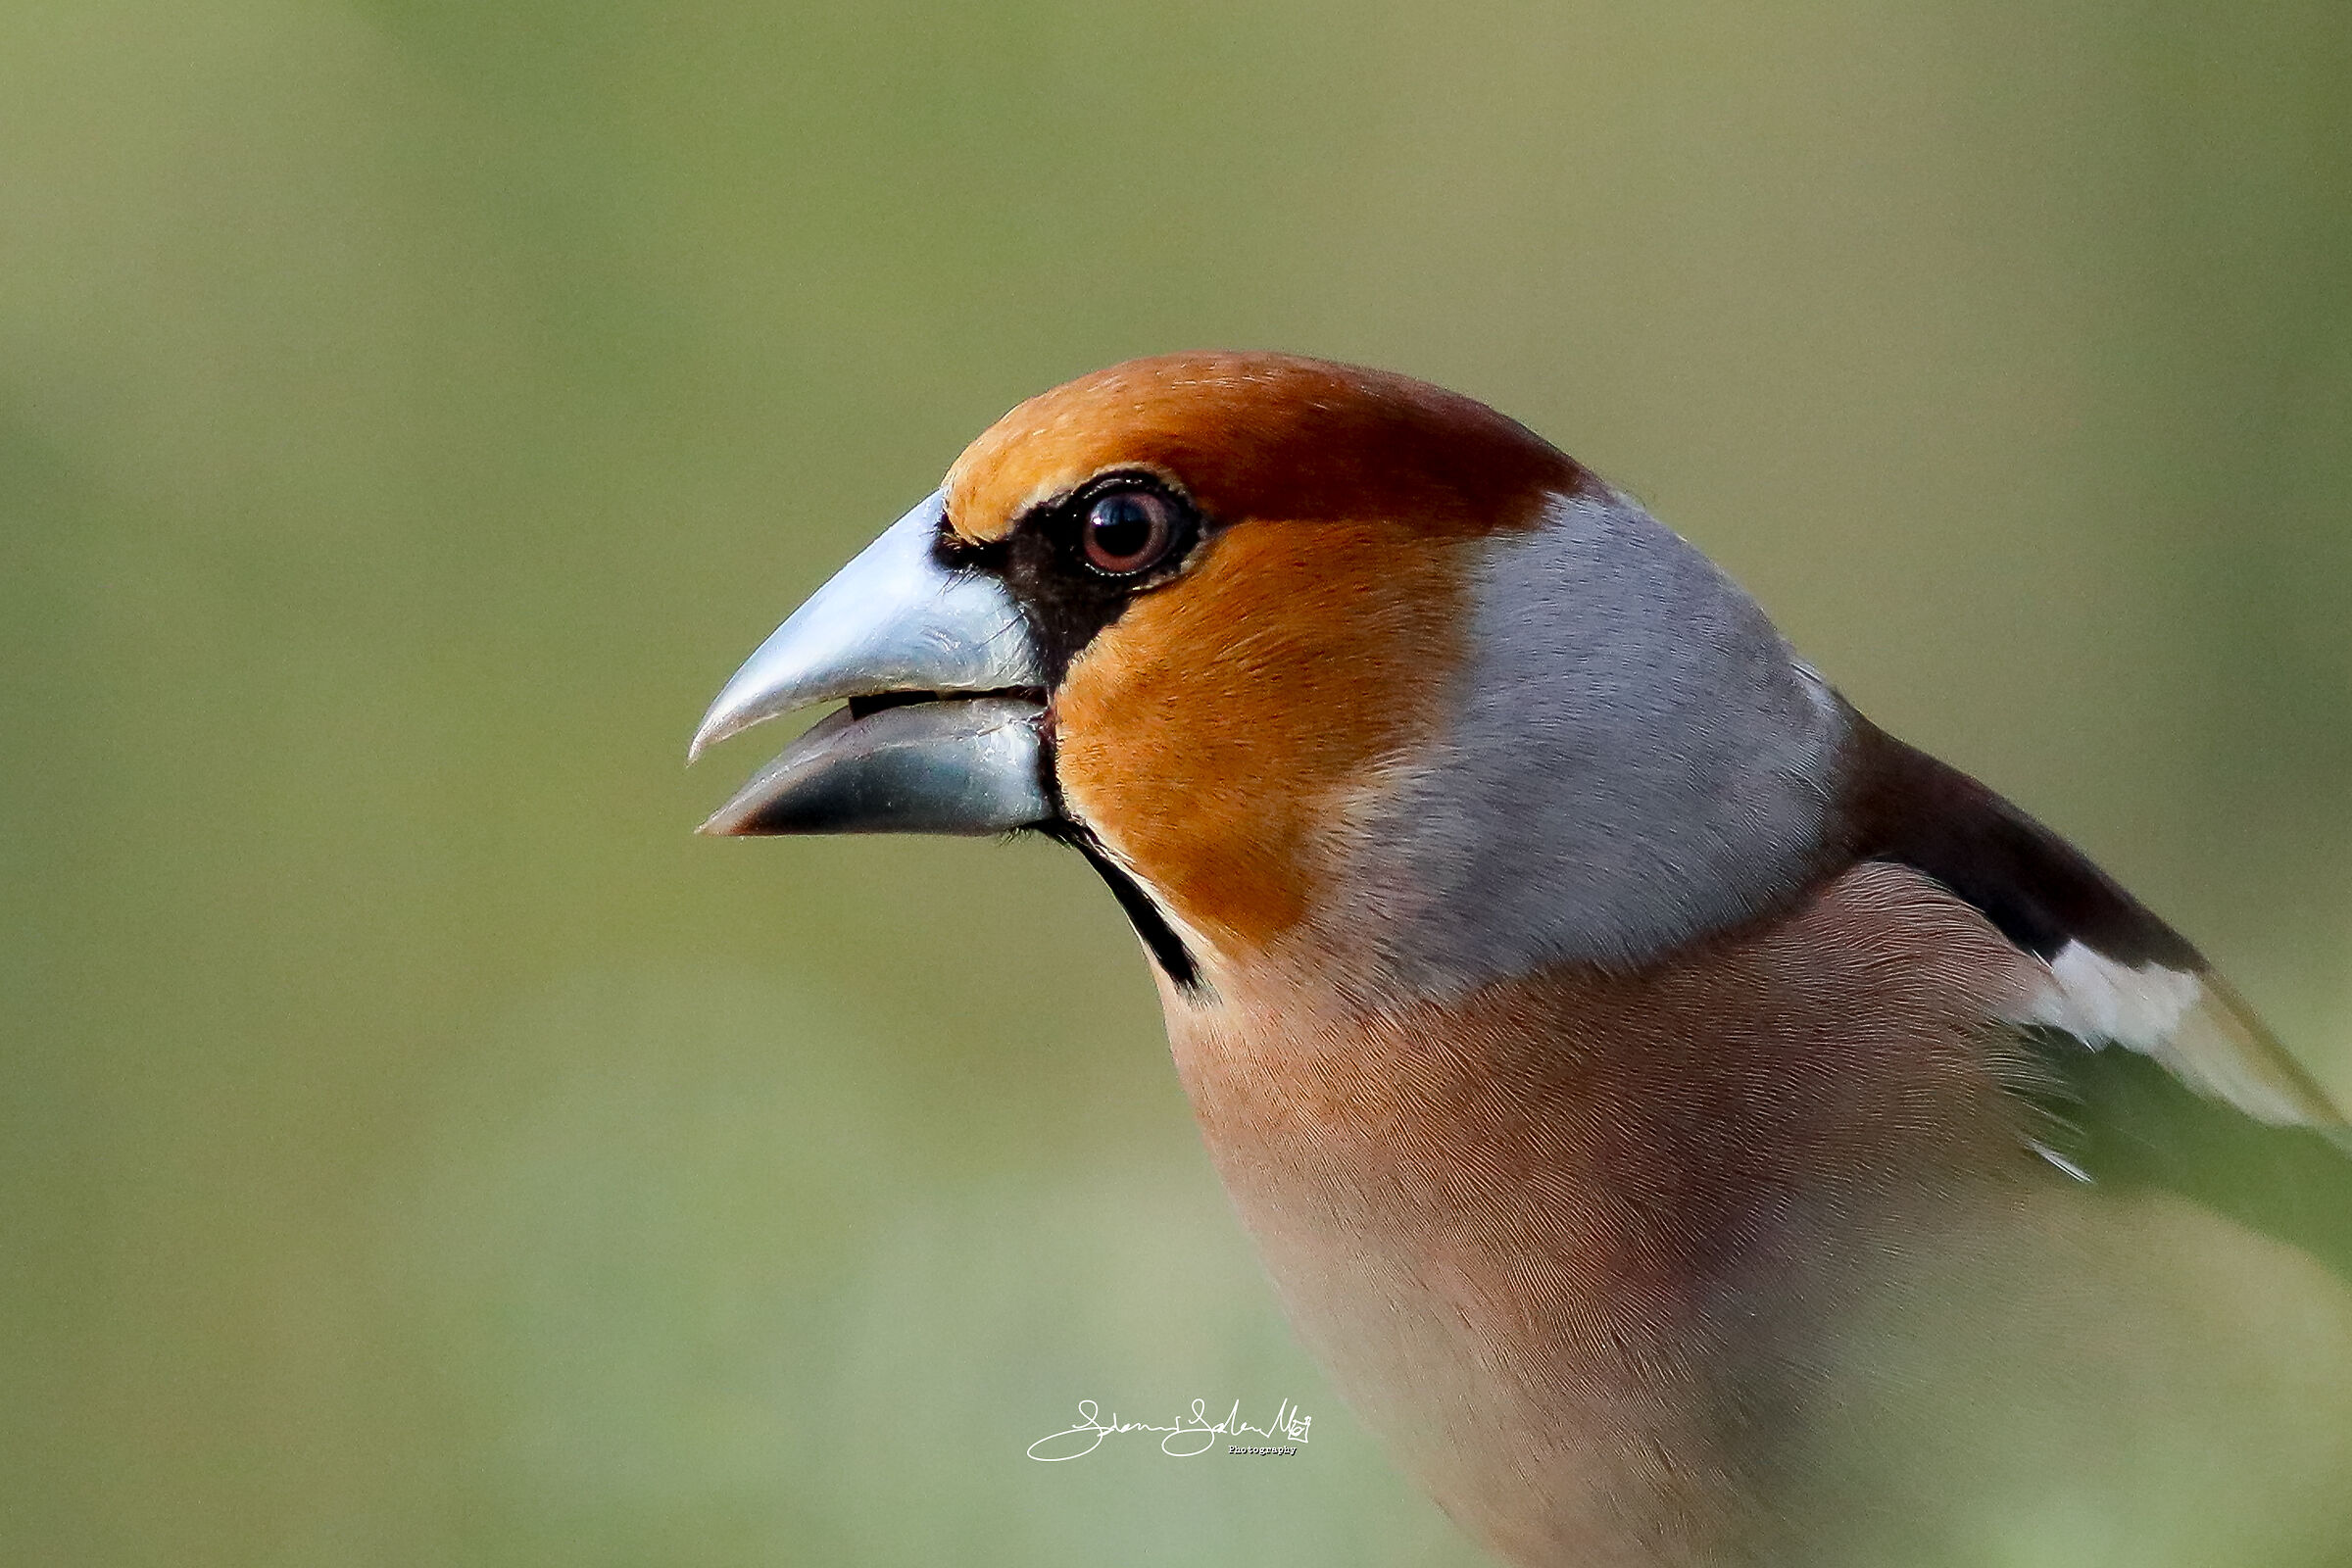 Hawfinch profile (Coccothraustes coccothraustes,L.1758)...